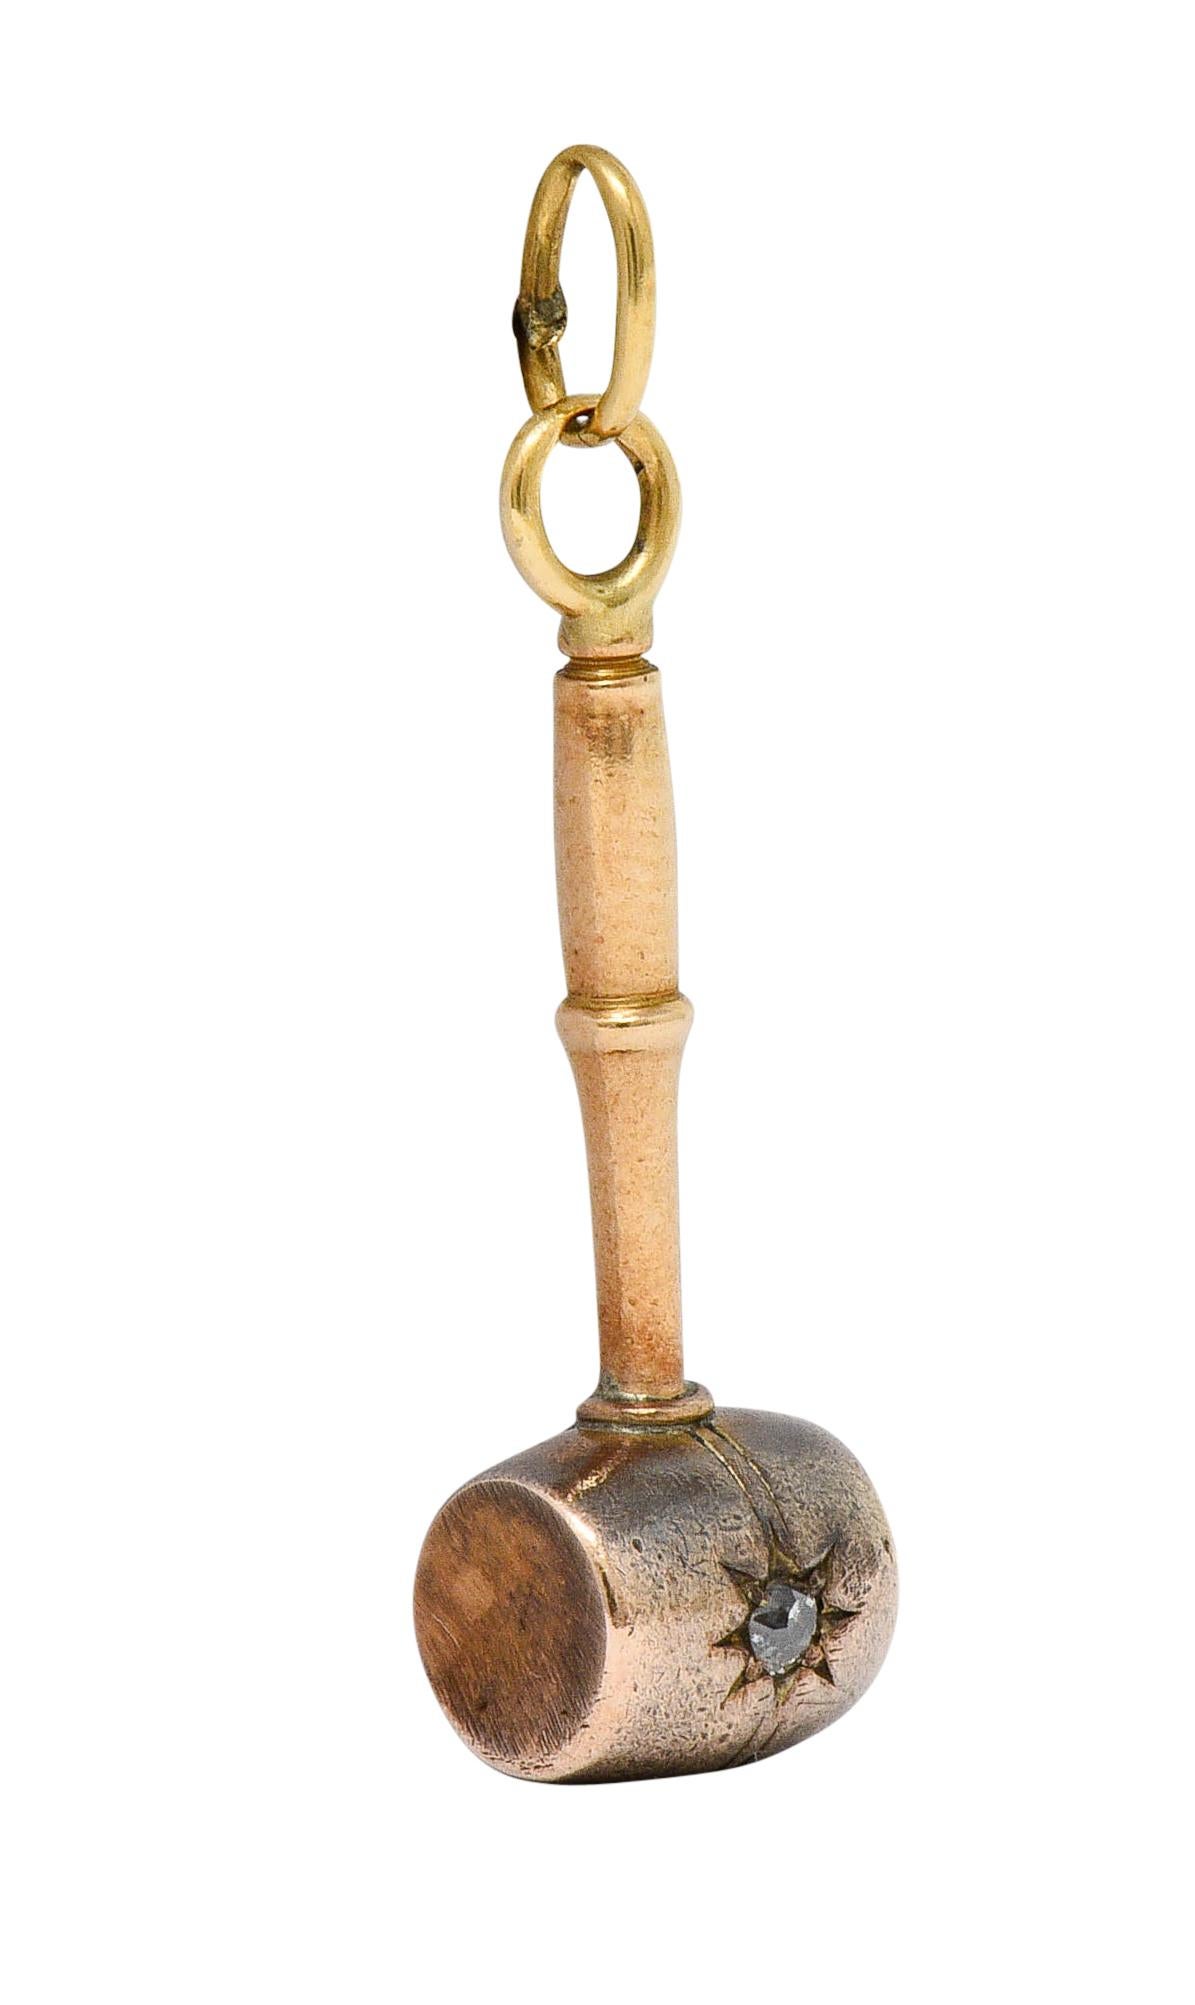 Designed as a stylized mallet gavel accented by an old European cut diamond

Weighing approximately 0.05 carat and graver set as a starburst motif

Completed by a jump ring bale

Tested as 14 karat gold

Circa: 1905

Measures: 3/8 x 1 1/4 inches